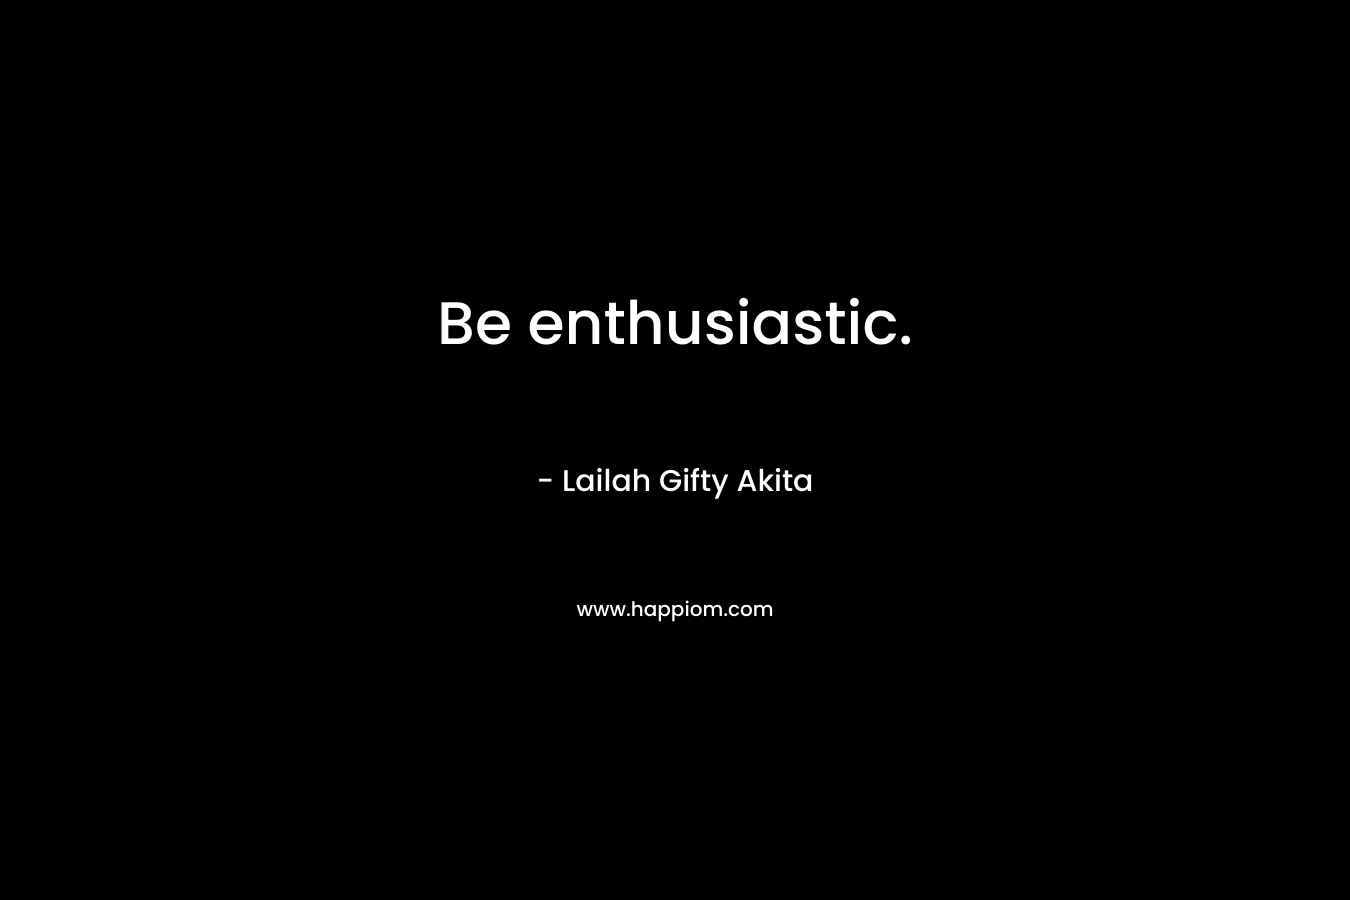 Be enthusiastic.